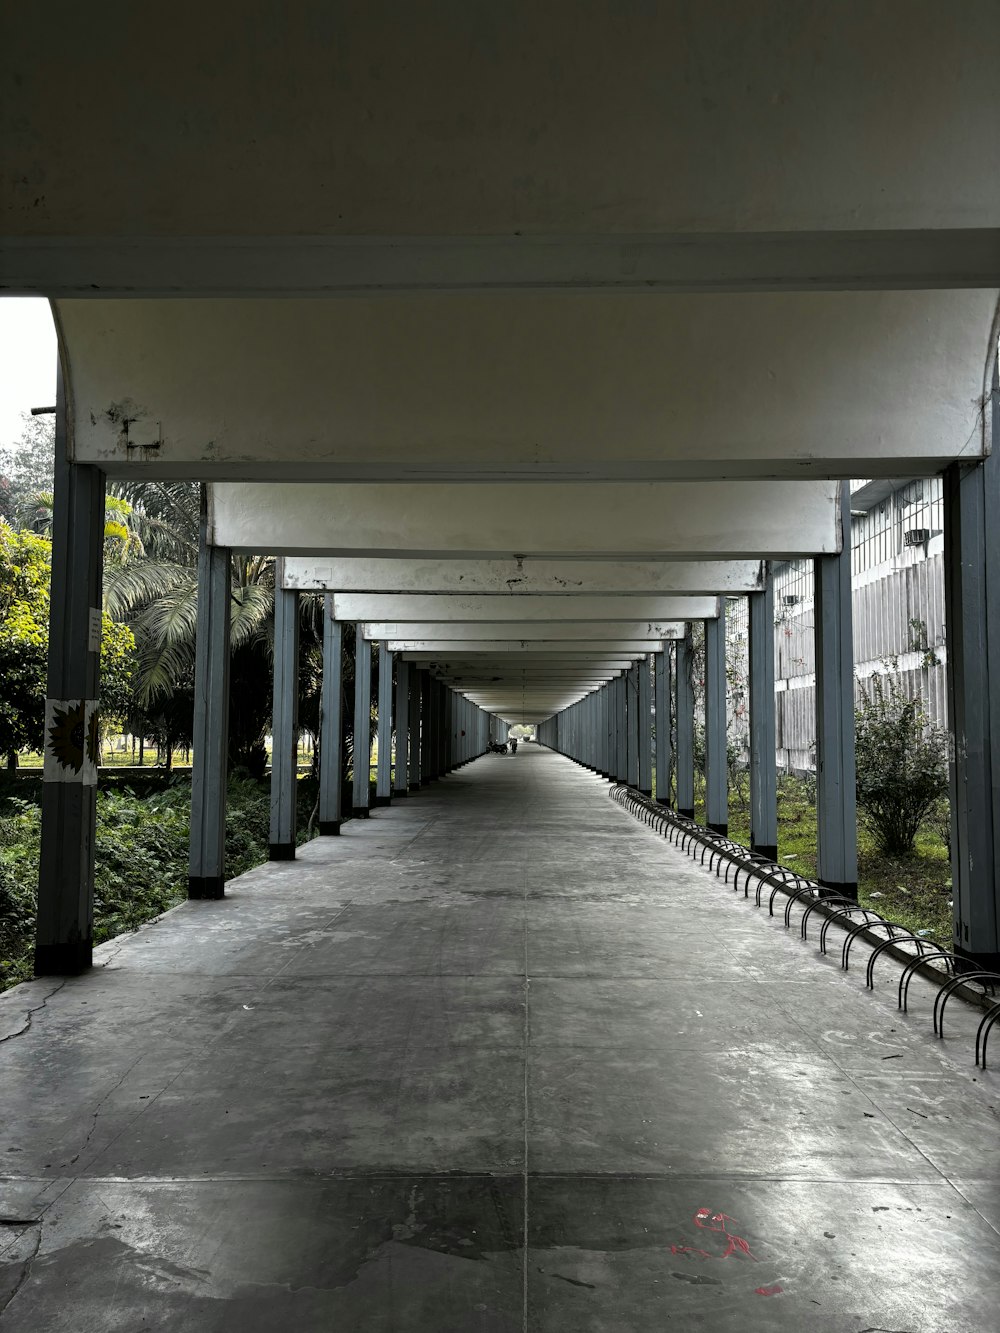 a long walkway lined with benches next to trees